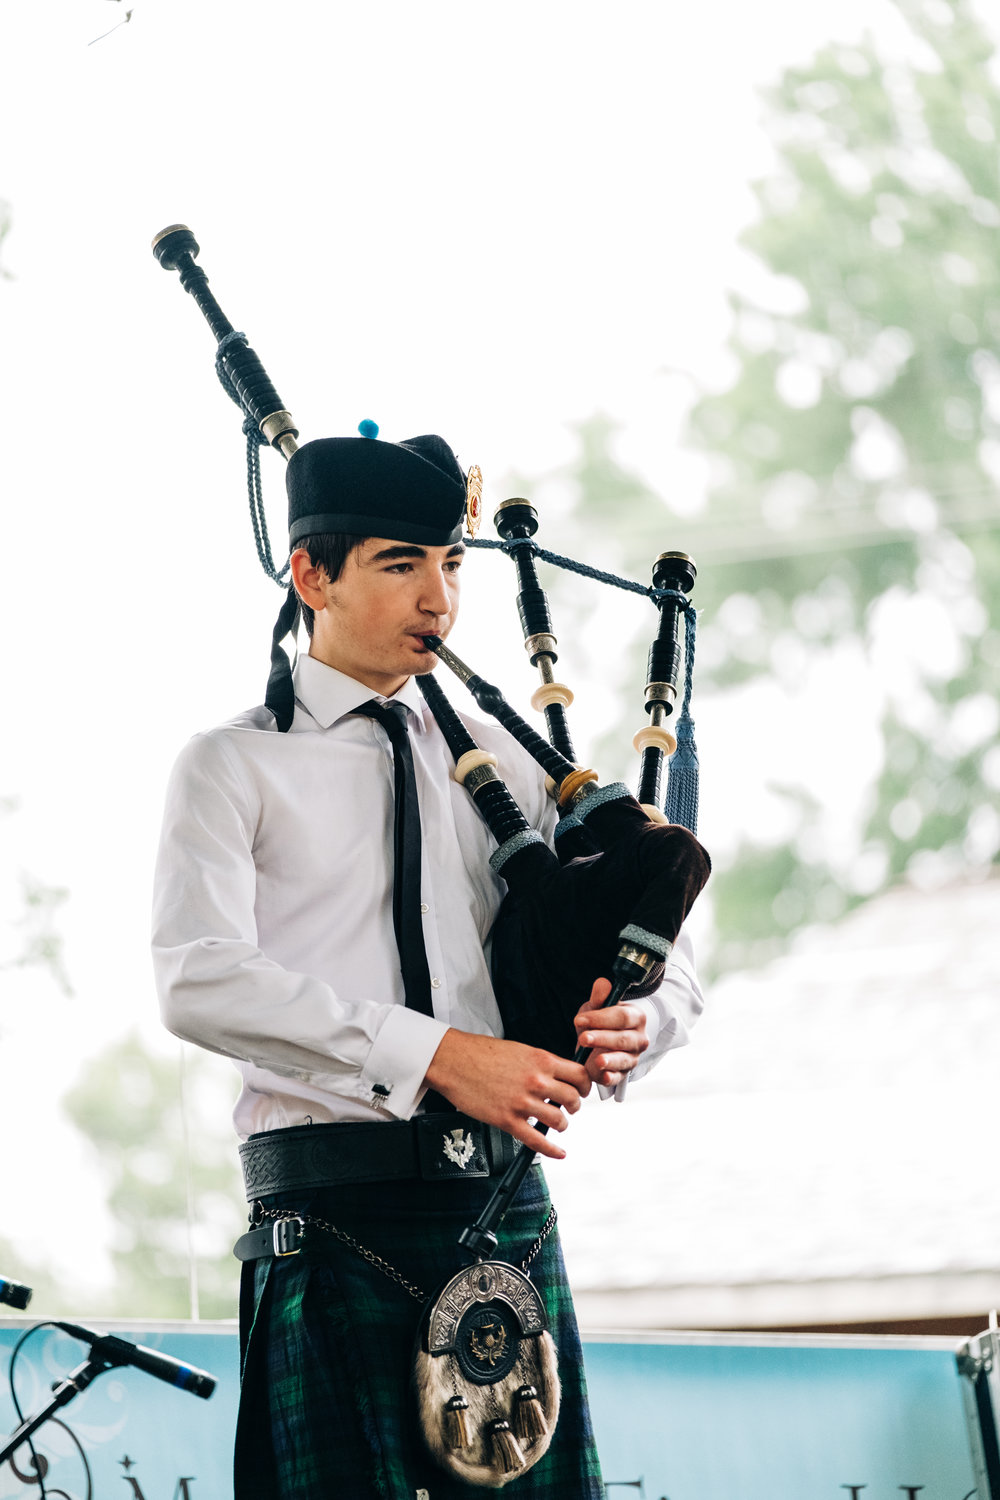 Orin Weiss plays the bag pipes during the Folklife Festival on the Astra Stage in Lincoln Park as part of the Little Balkans Days Celebration on Saturday.